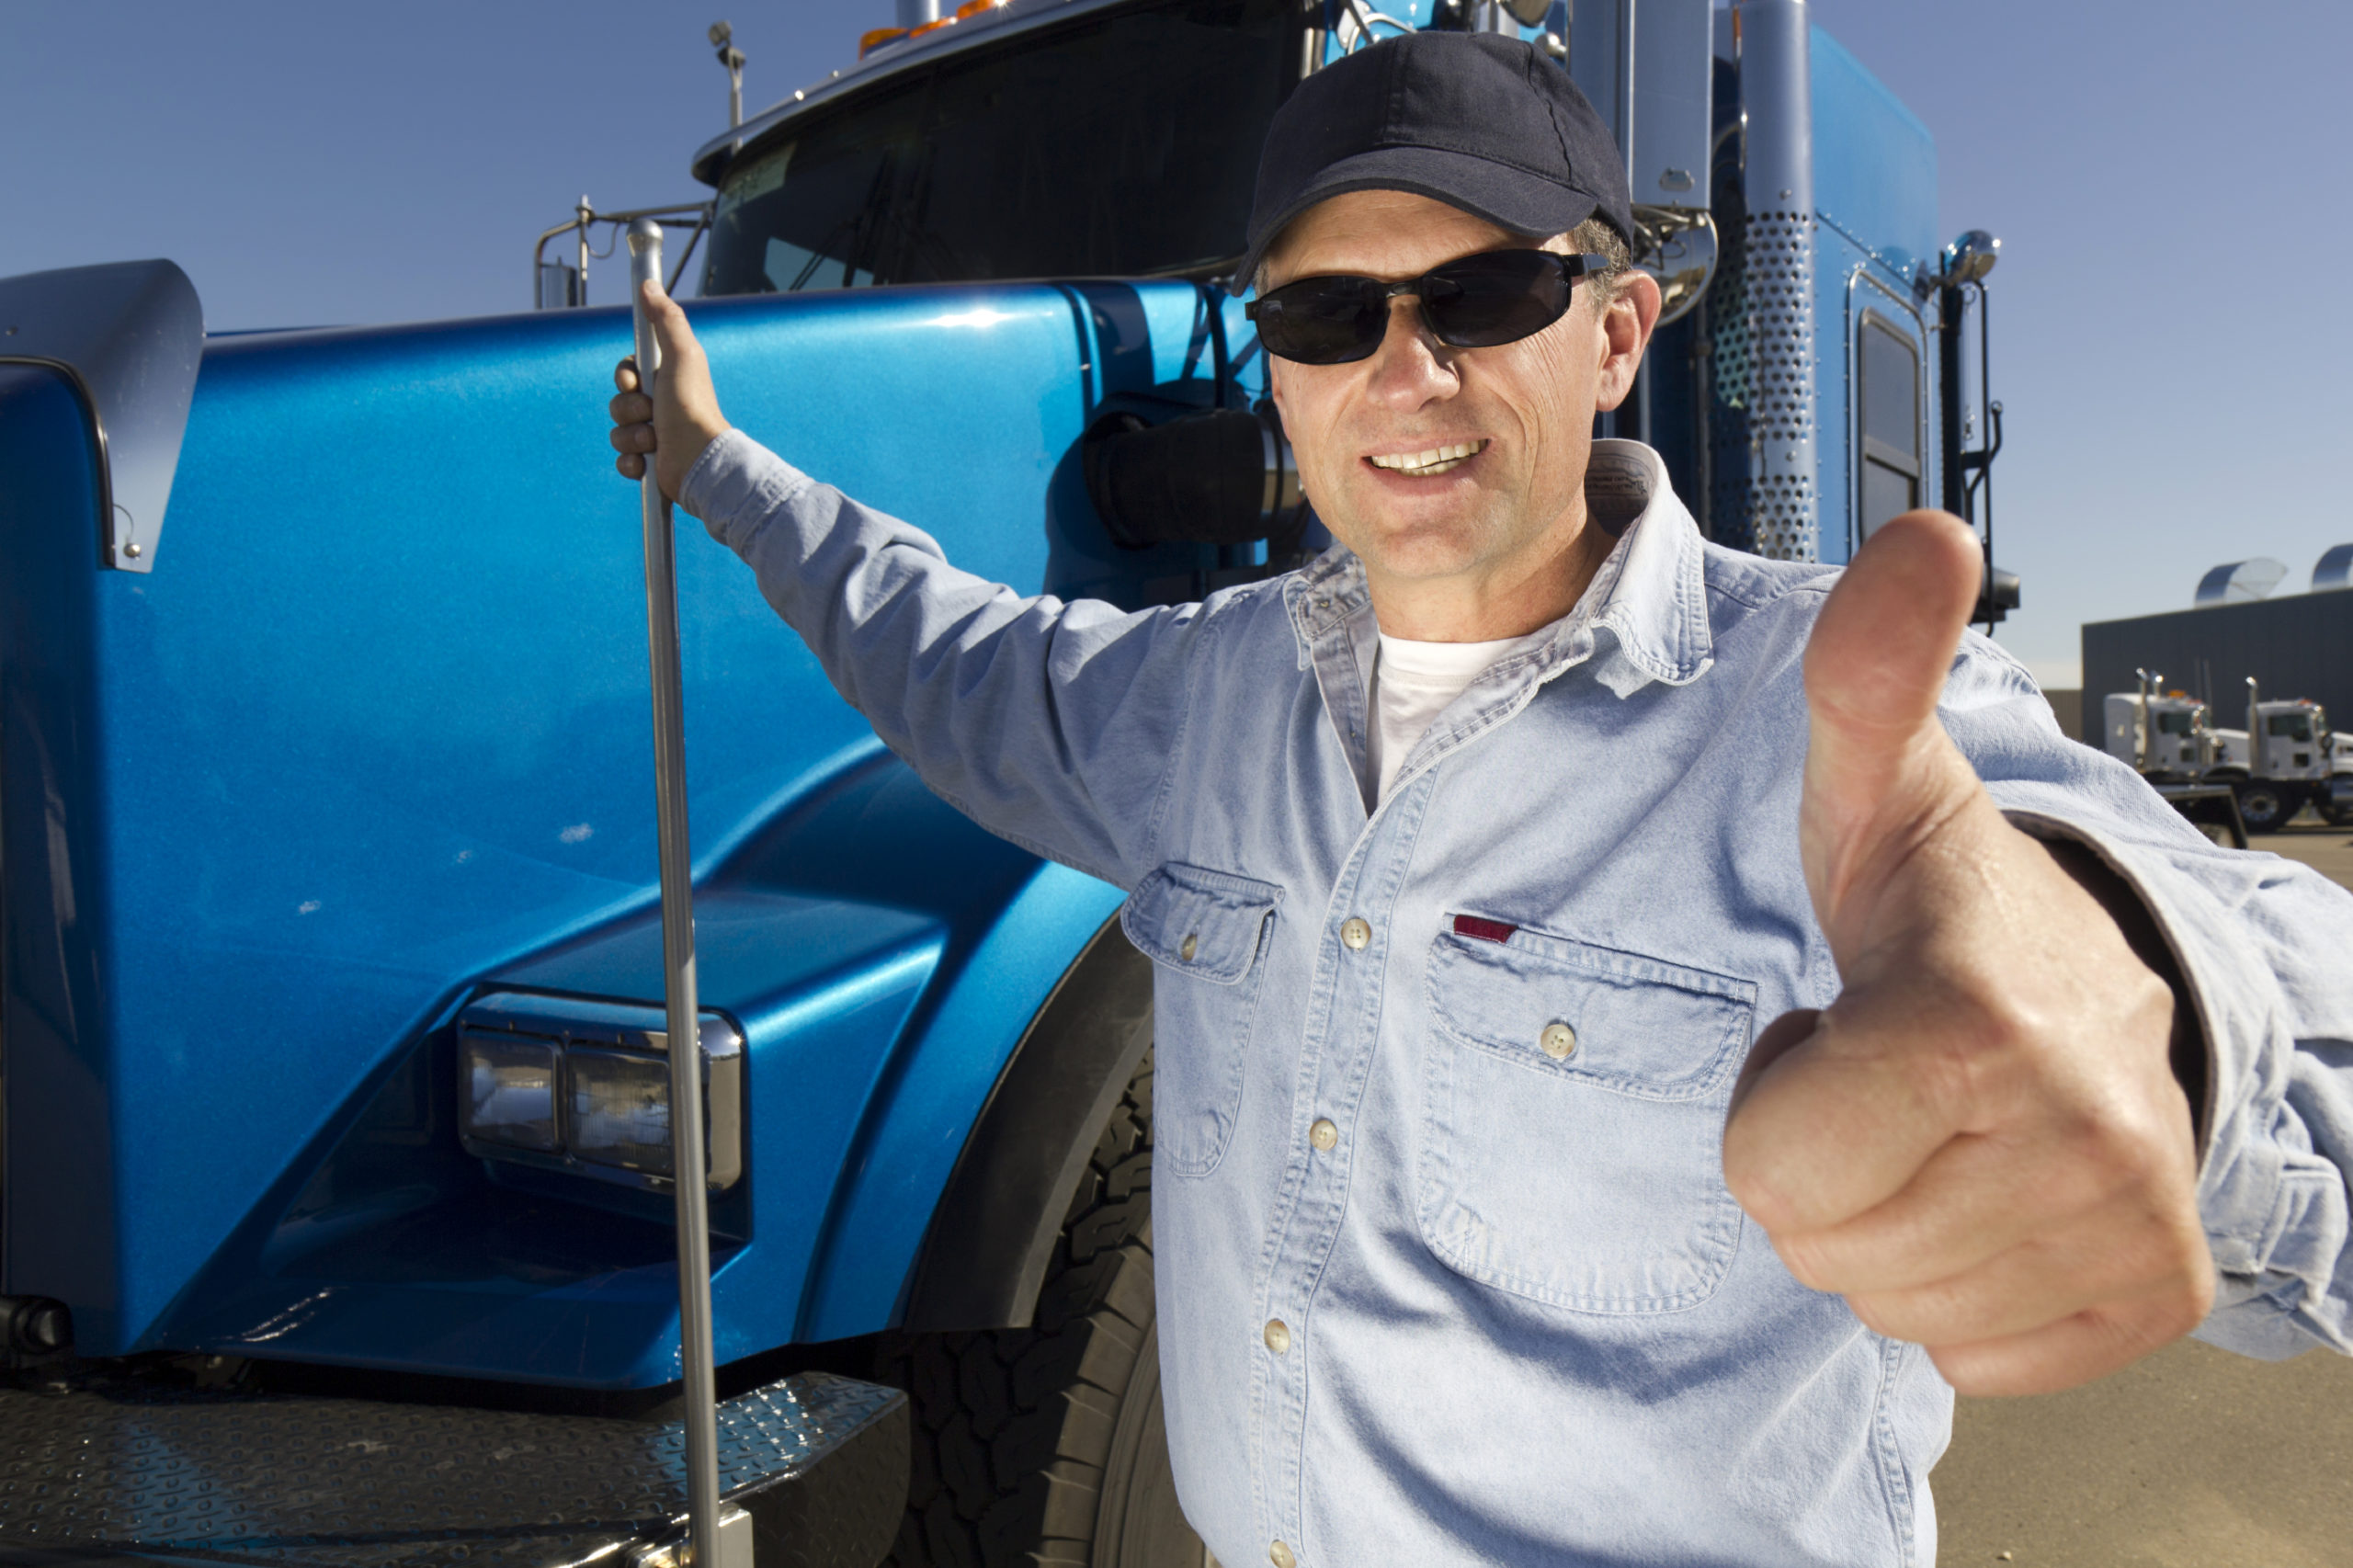 Commercial Drivers With Sleep Apnea: Here's What you need to know